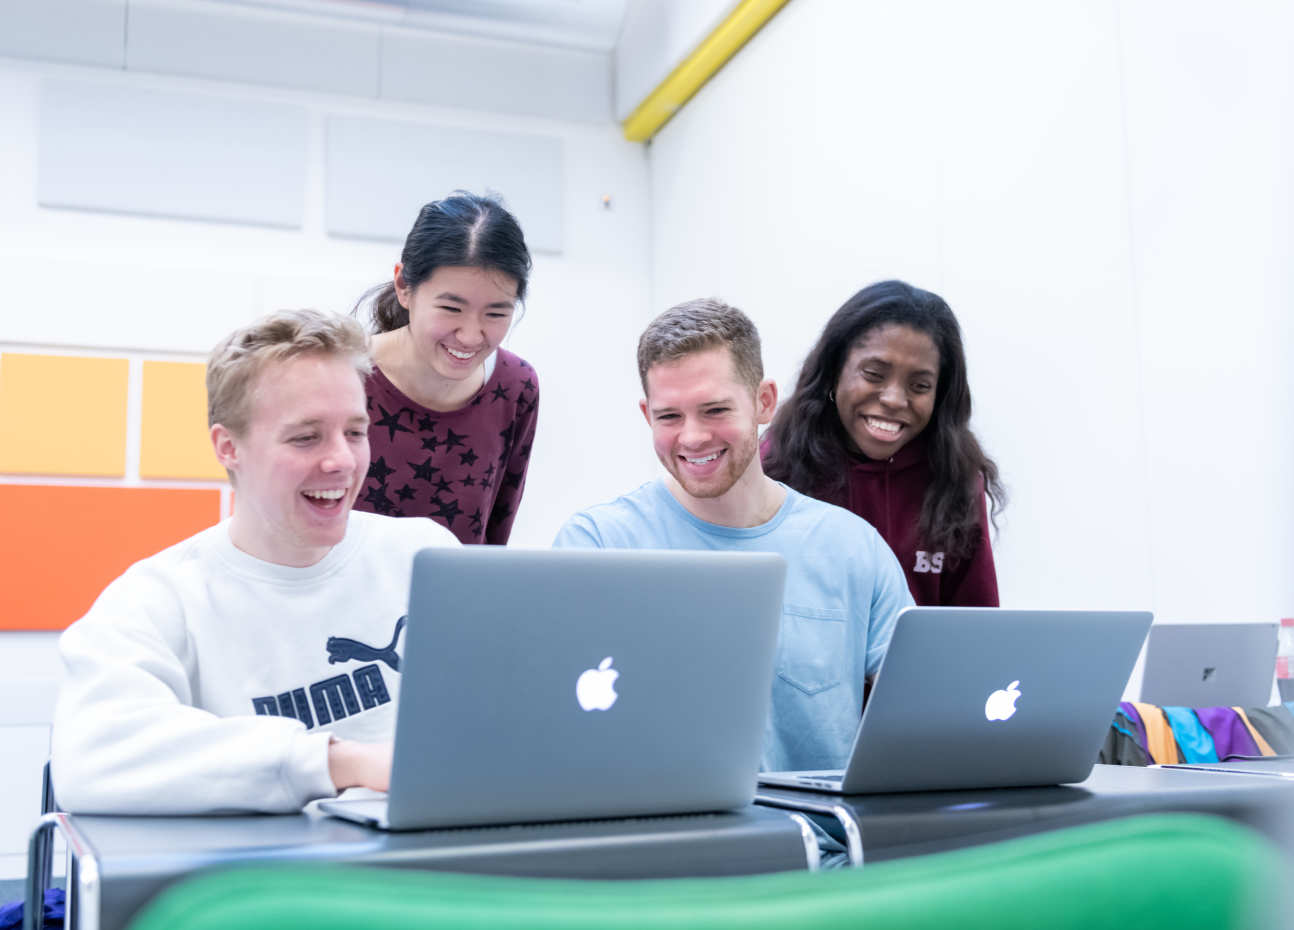 Applied Computational Science and Engineering MSc students working together on laptops